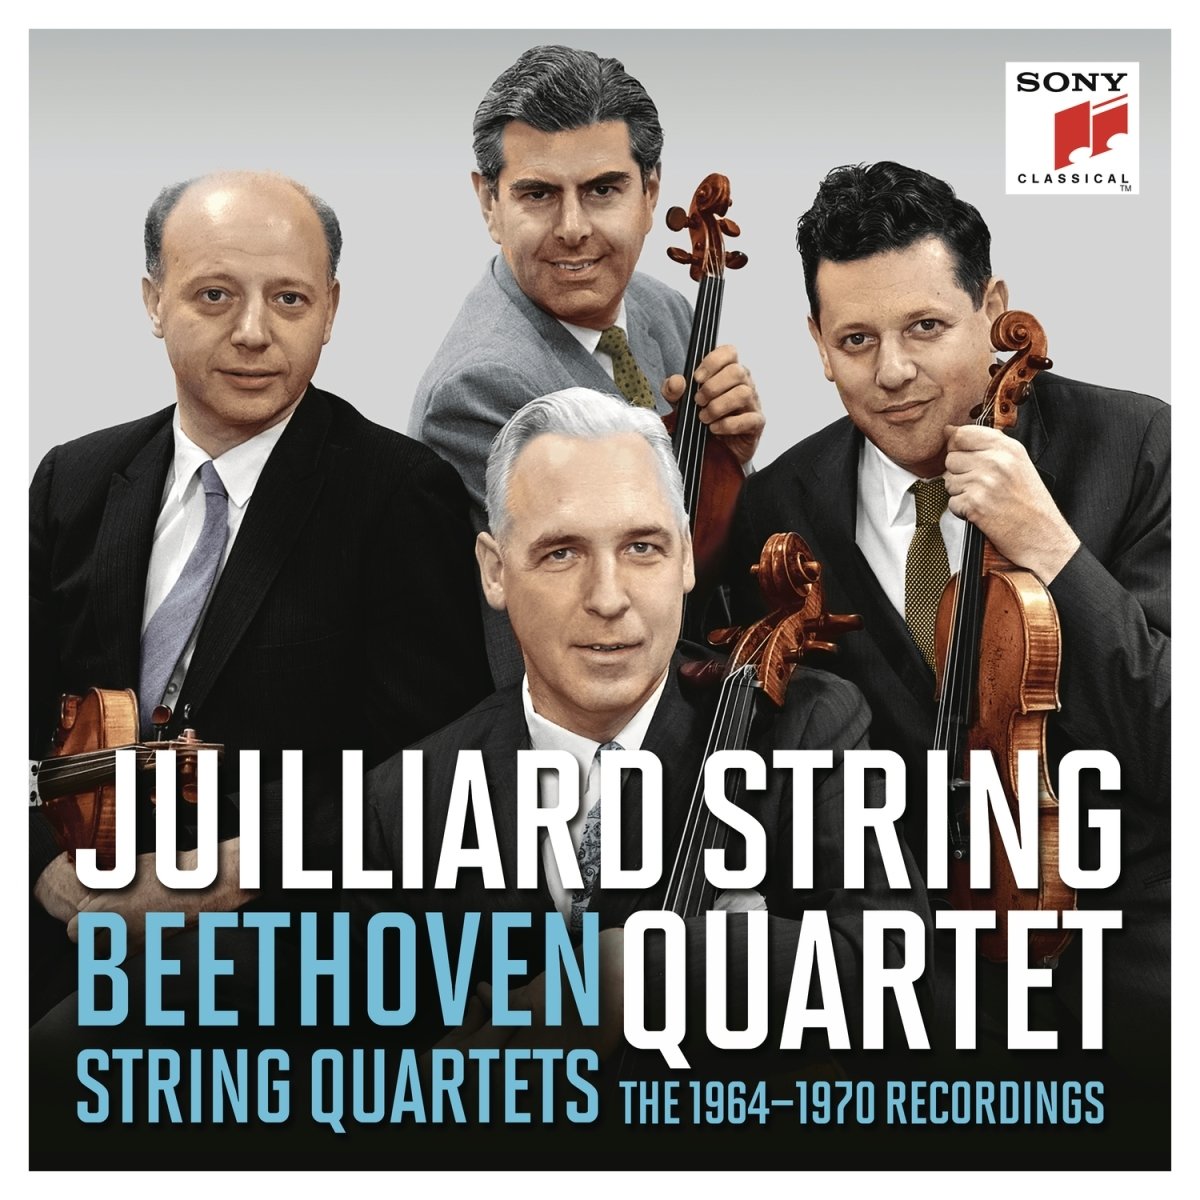 Beethoven String Quartets 1964-1970 Recordings | Ludwig Van Beethoven, Juilliard String Quartet 1964-1970 poza noua